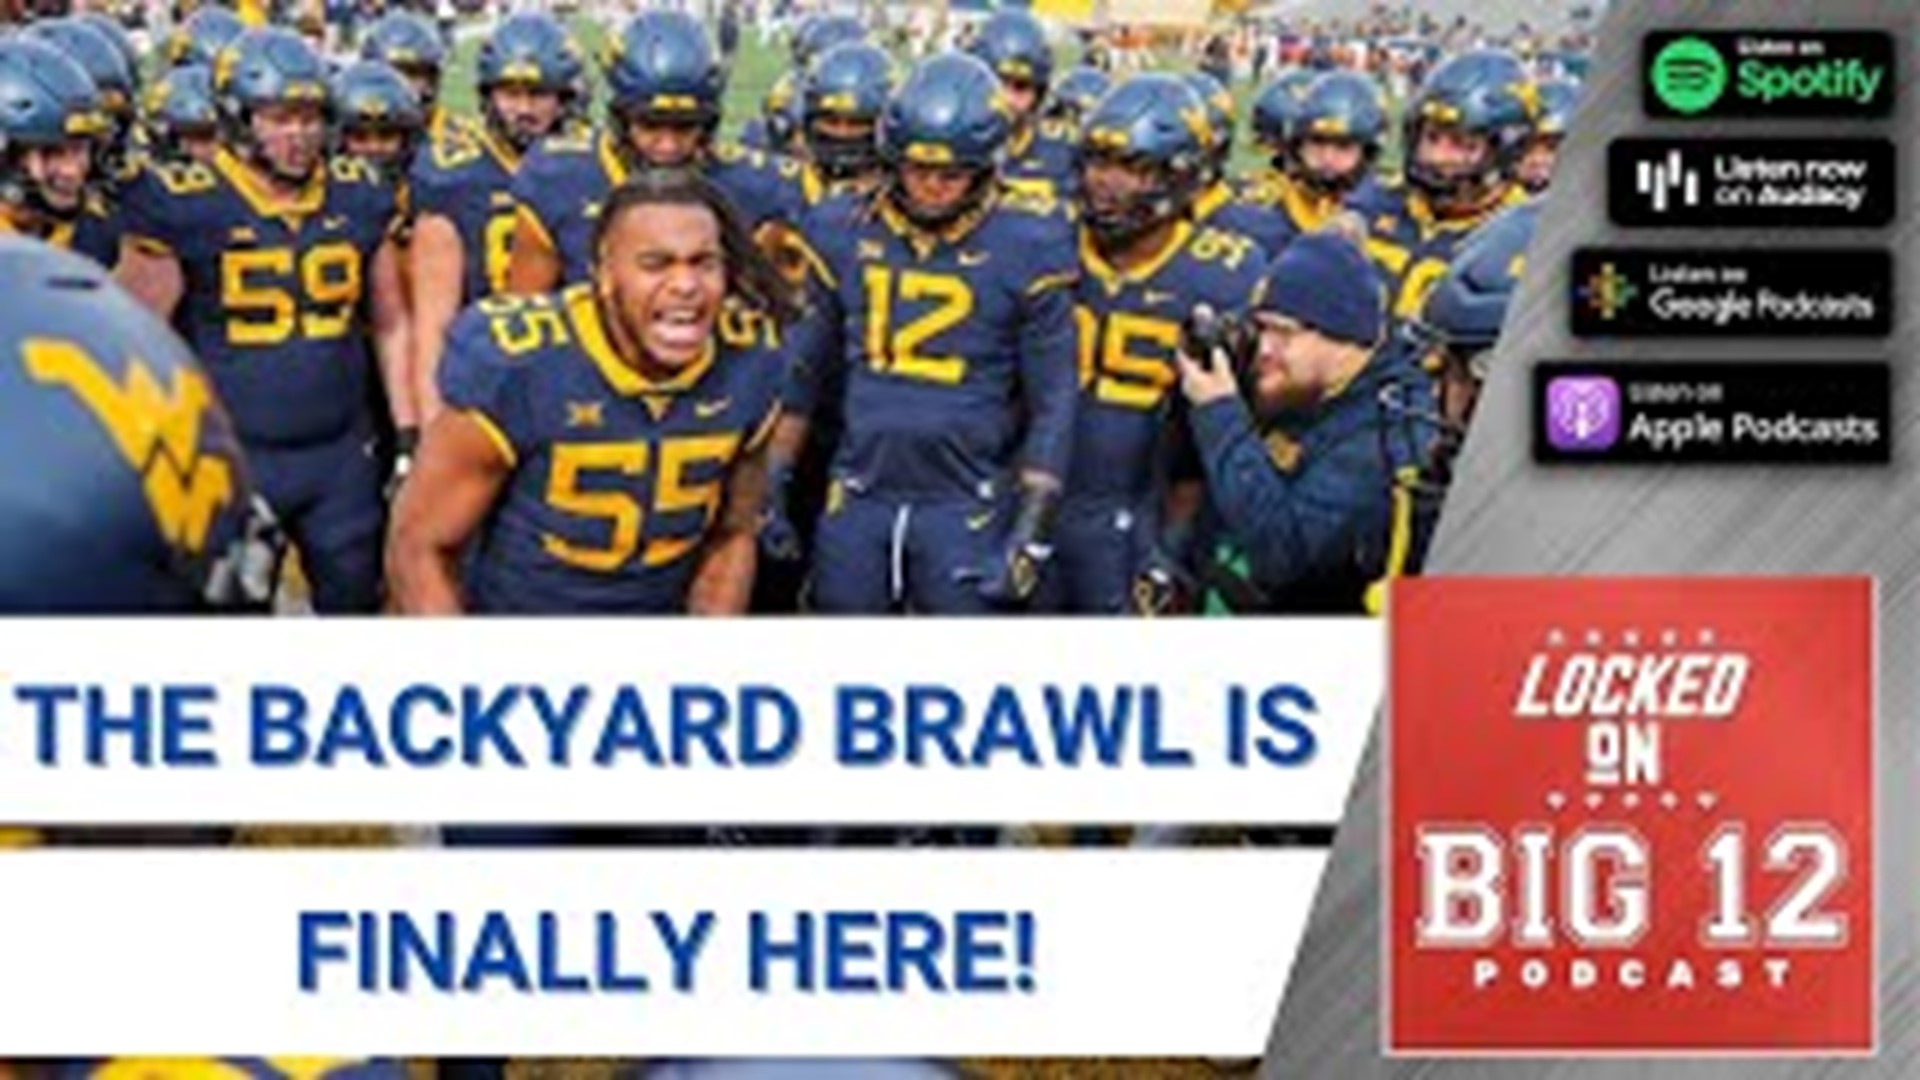 The Backyard Brawl Is Here! + What To Watch For In Week 1 From The Big 12 With Triano